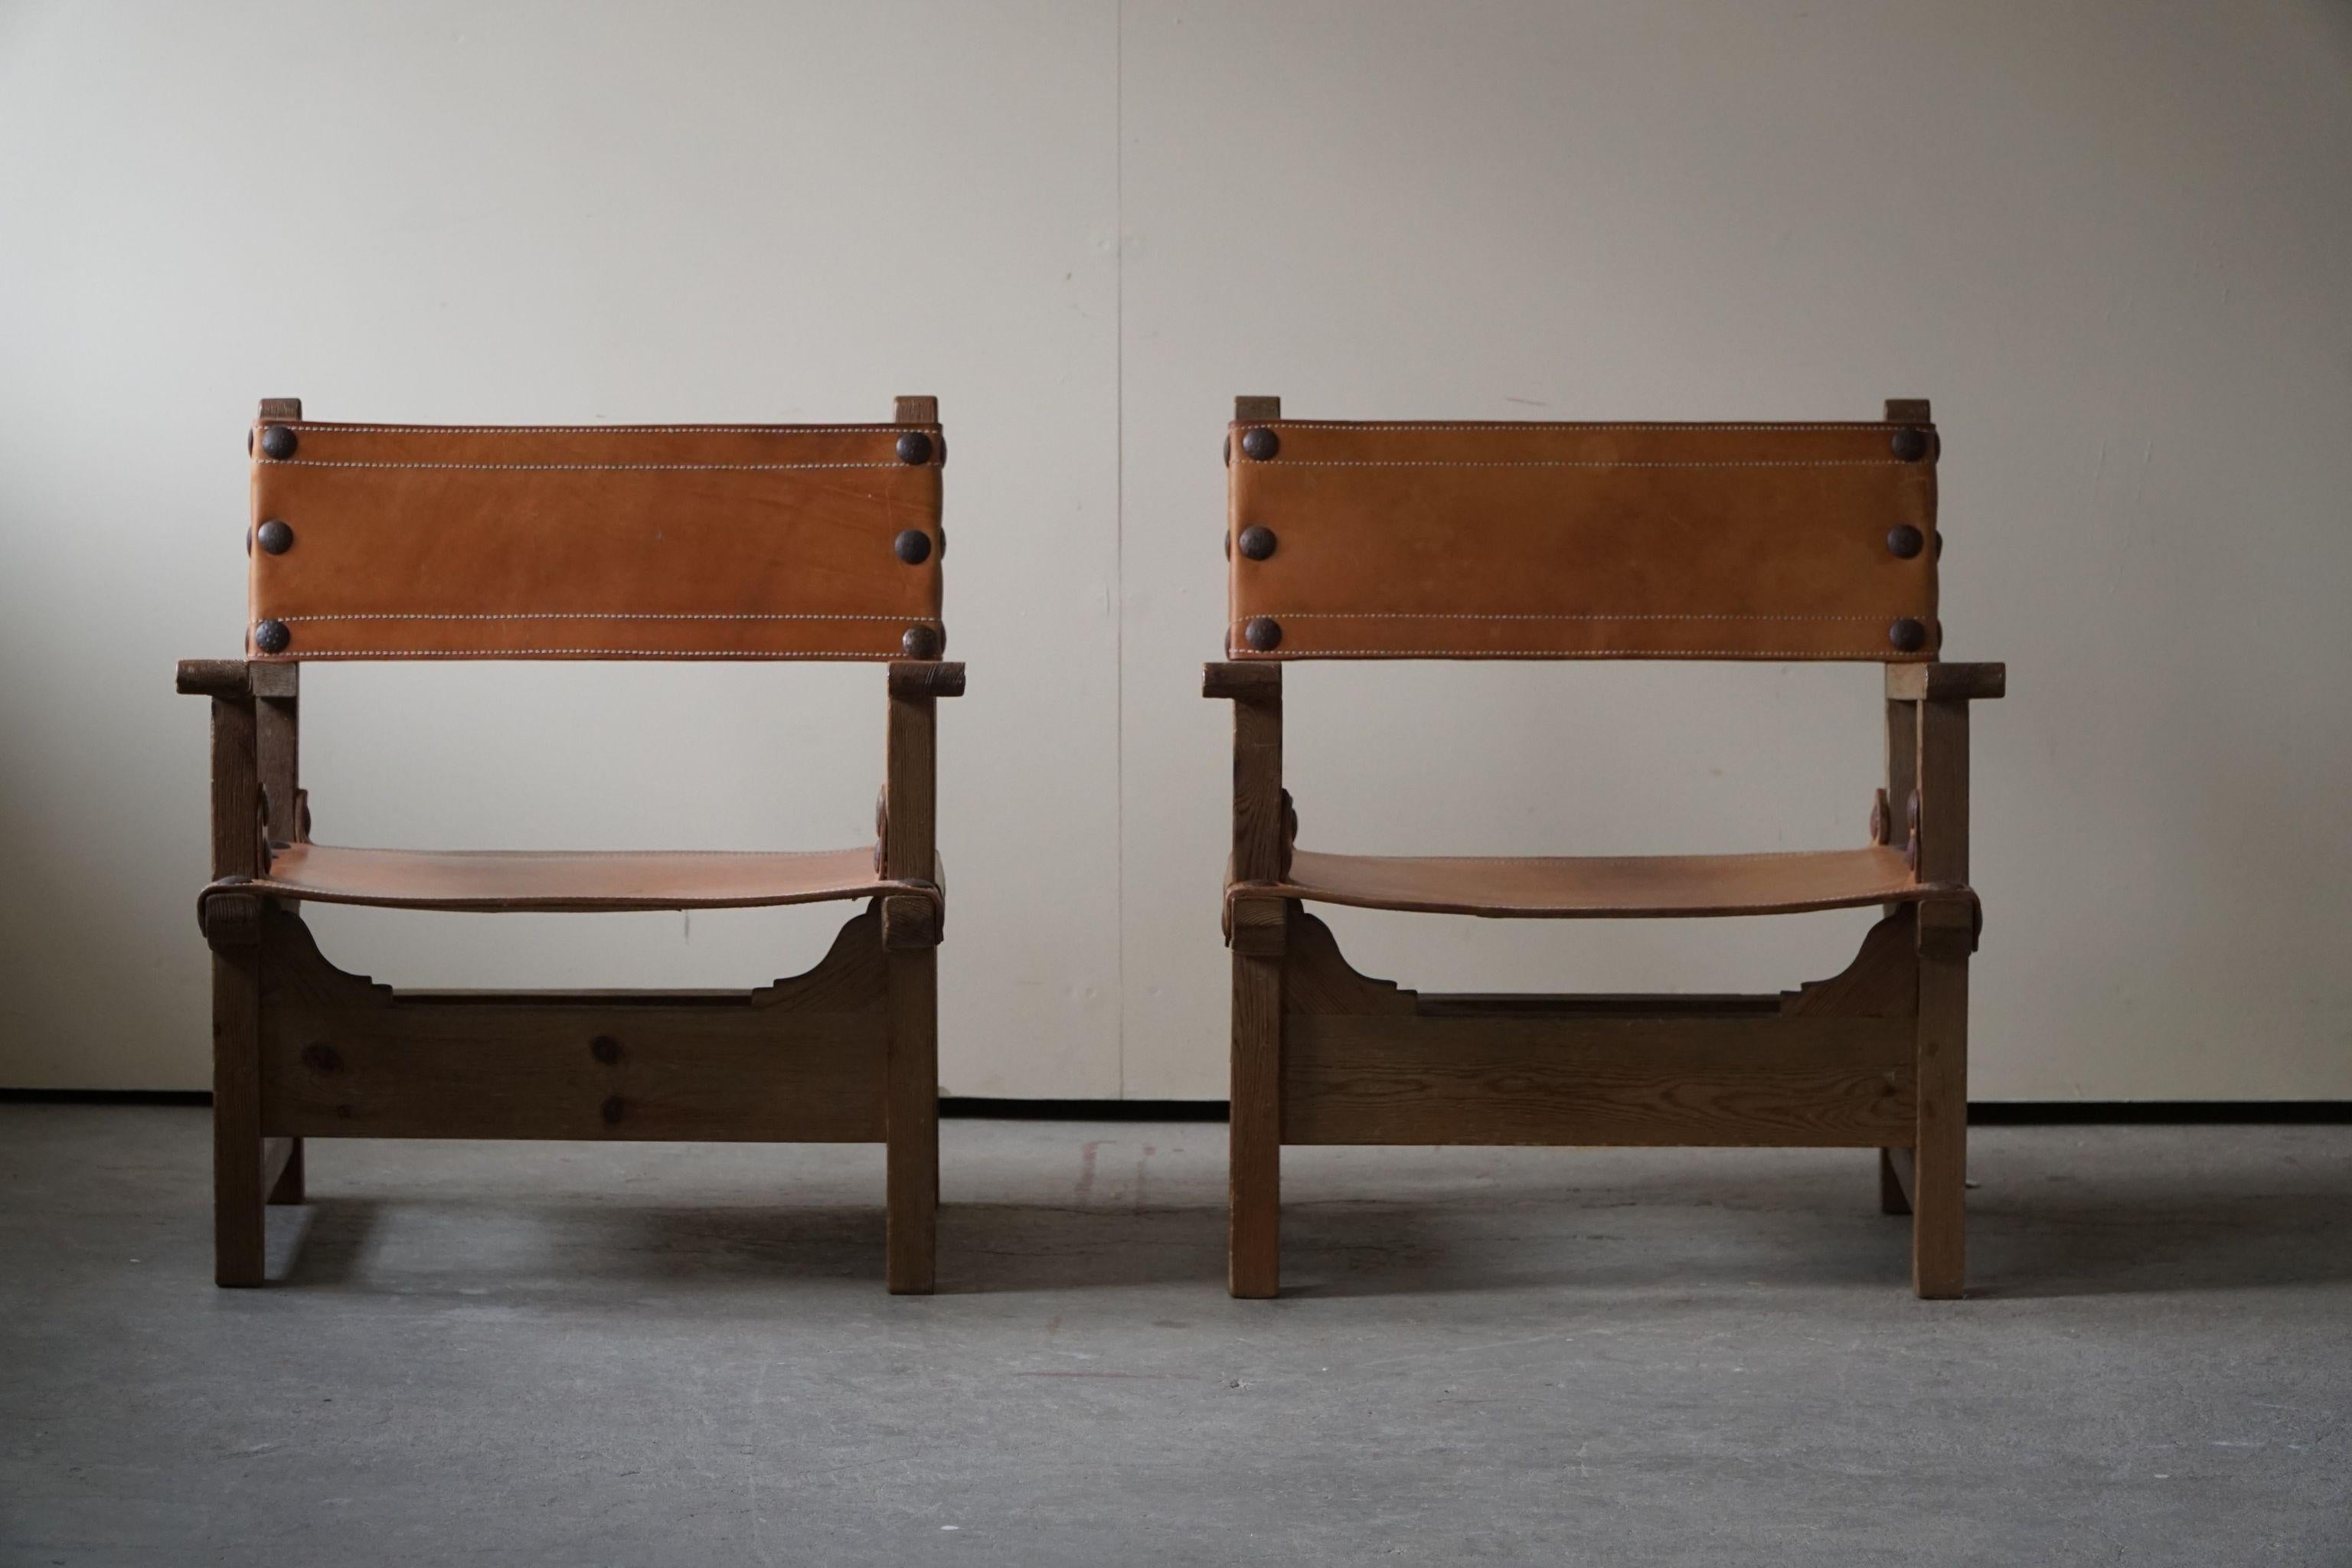 Spanish Modern, A Pair of Brutalist Armchairs in Oak & Cognac Leather, 1960s For Sale 13